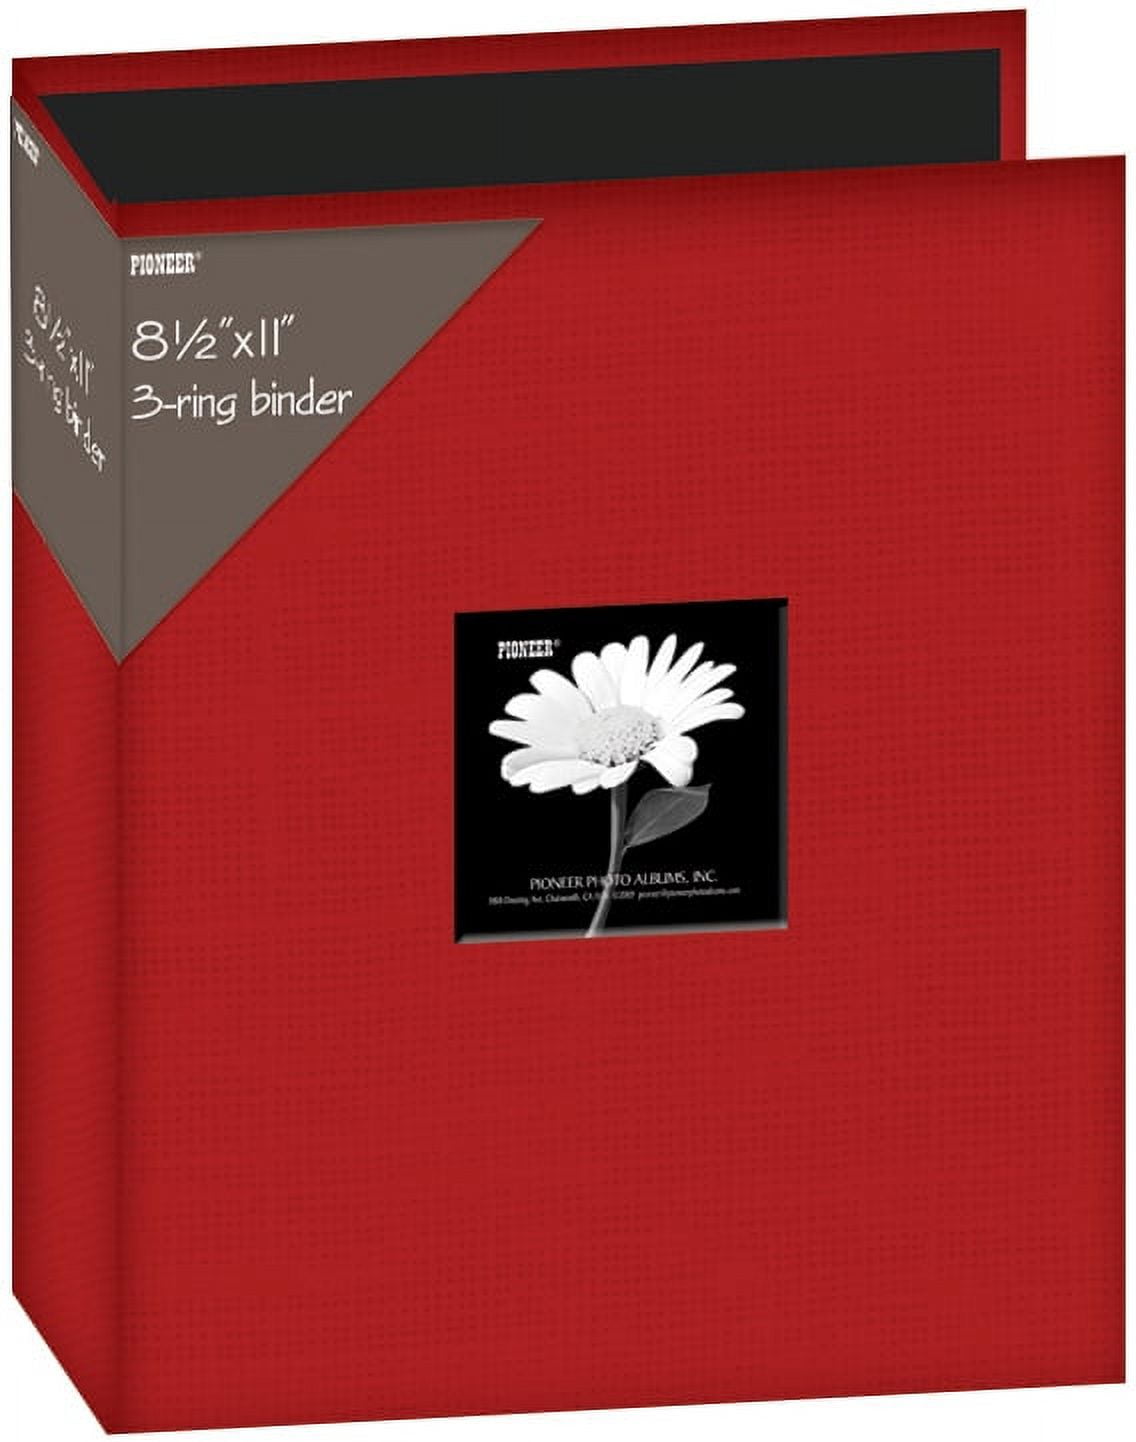 Glossy Amateur Book 5 X7 Size Print Album at best price in Nashik